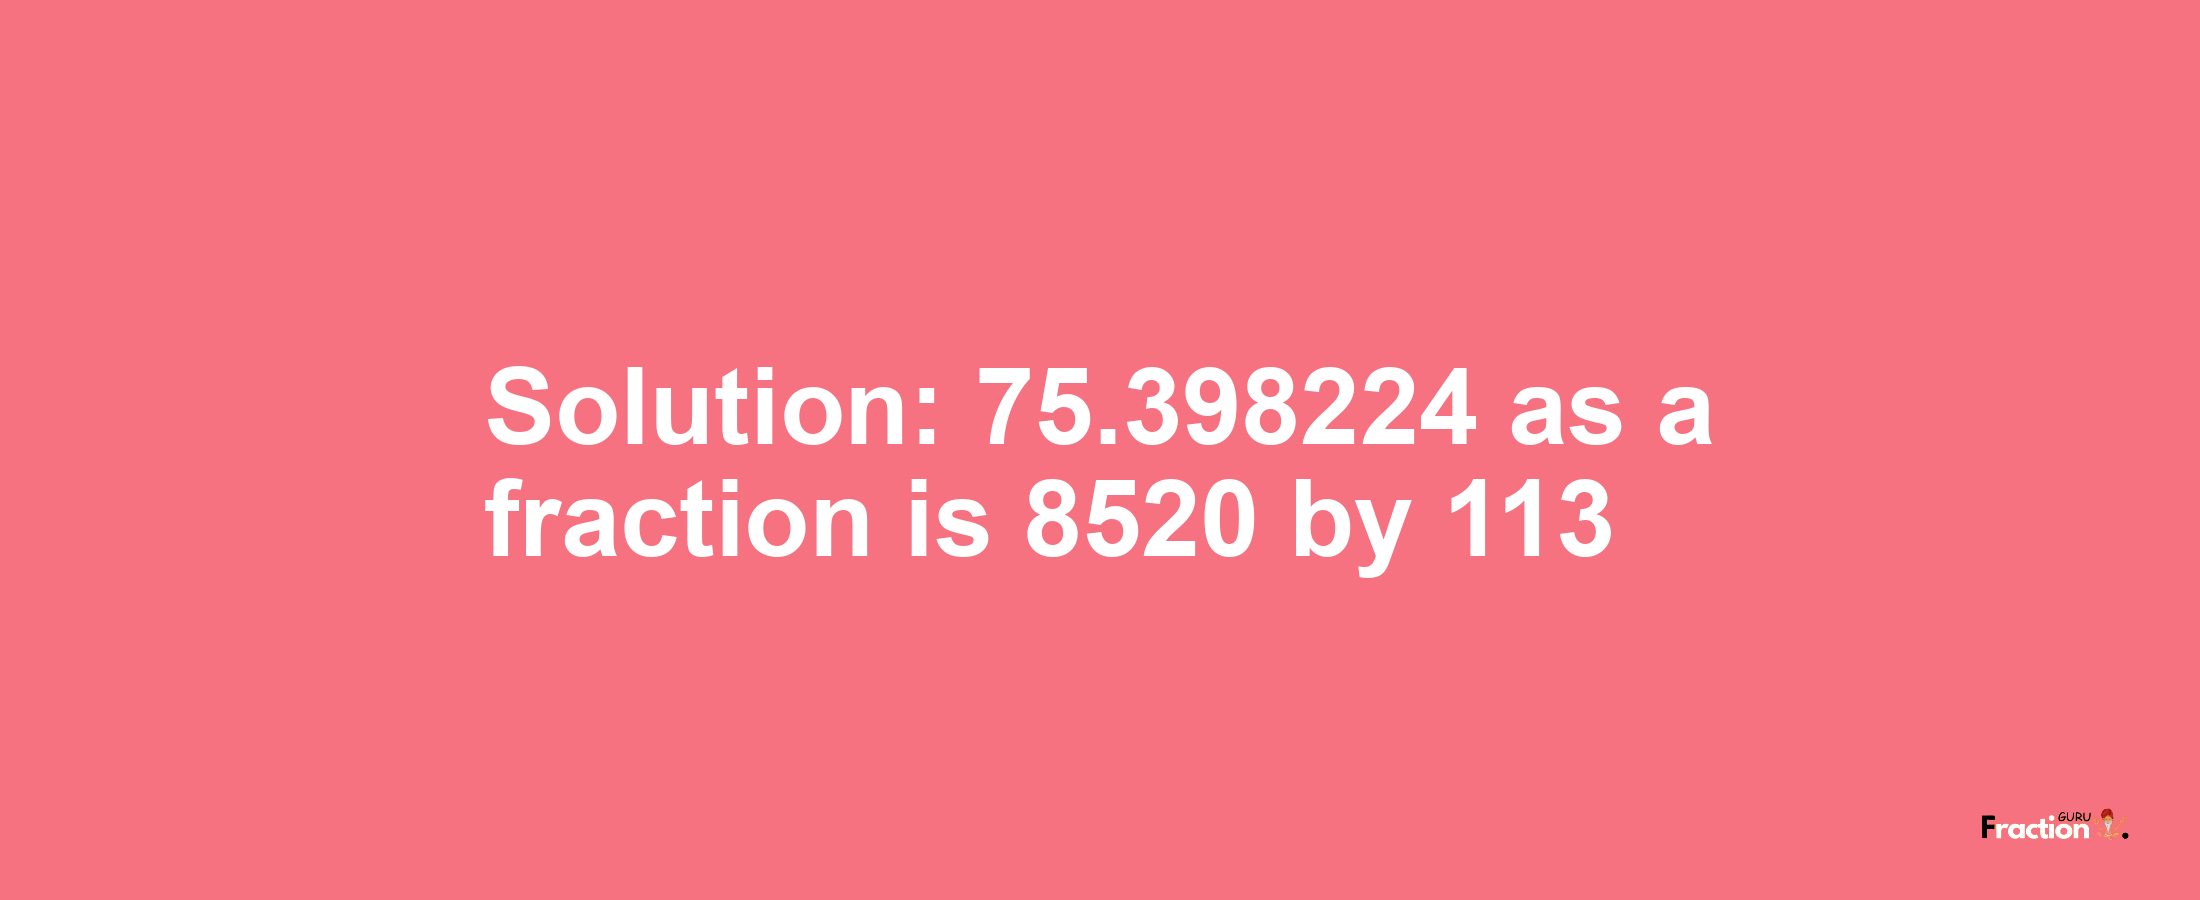 Solution:75.398224 as a fraction is 8520/113